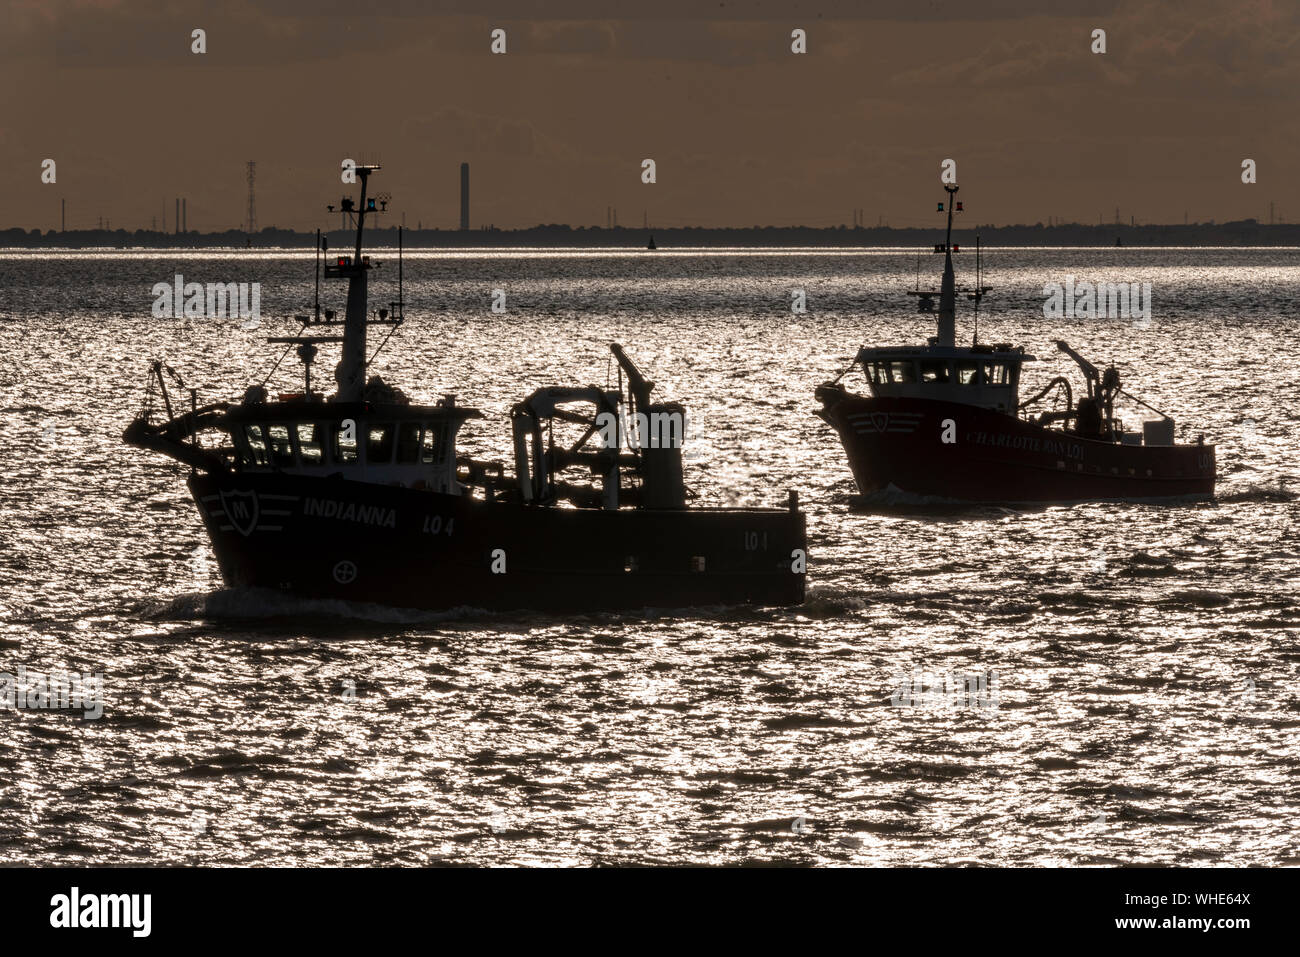 Fishing boats Indianna heading out to sea to fish late afternoon for the night out of Leigh on Sea passing Southend on the Thames Estuary. Industry Stock Photo